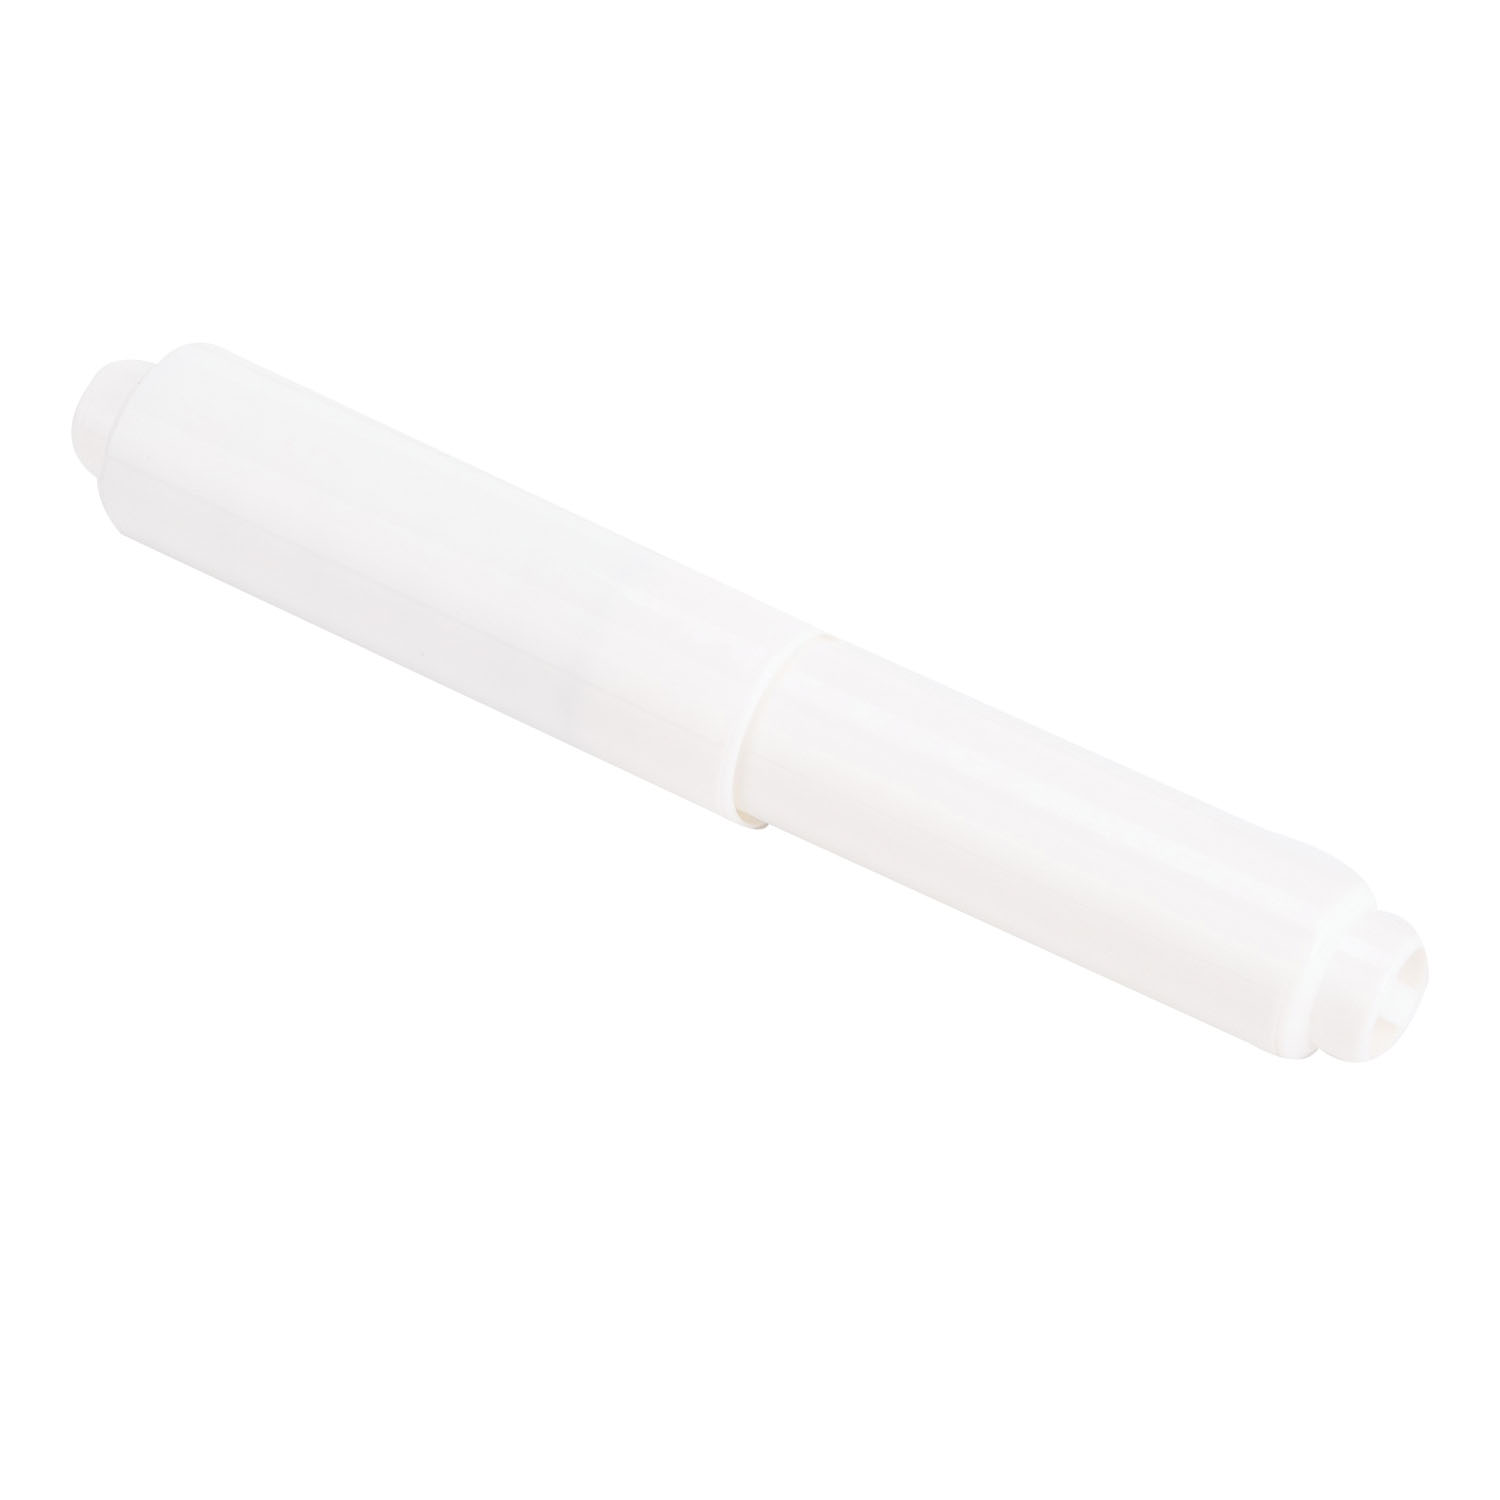 LBE02002-51-07 Paper Roller, Plastic, Wall Mounting